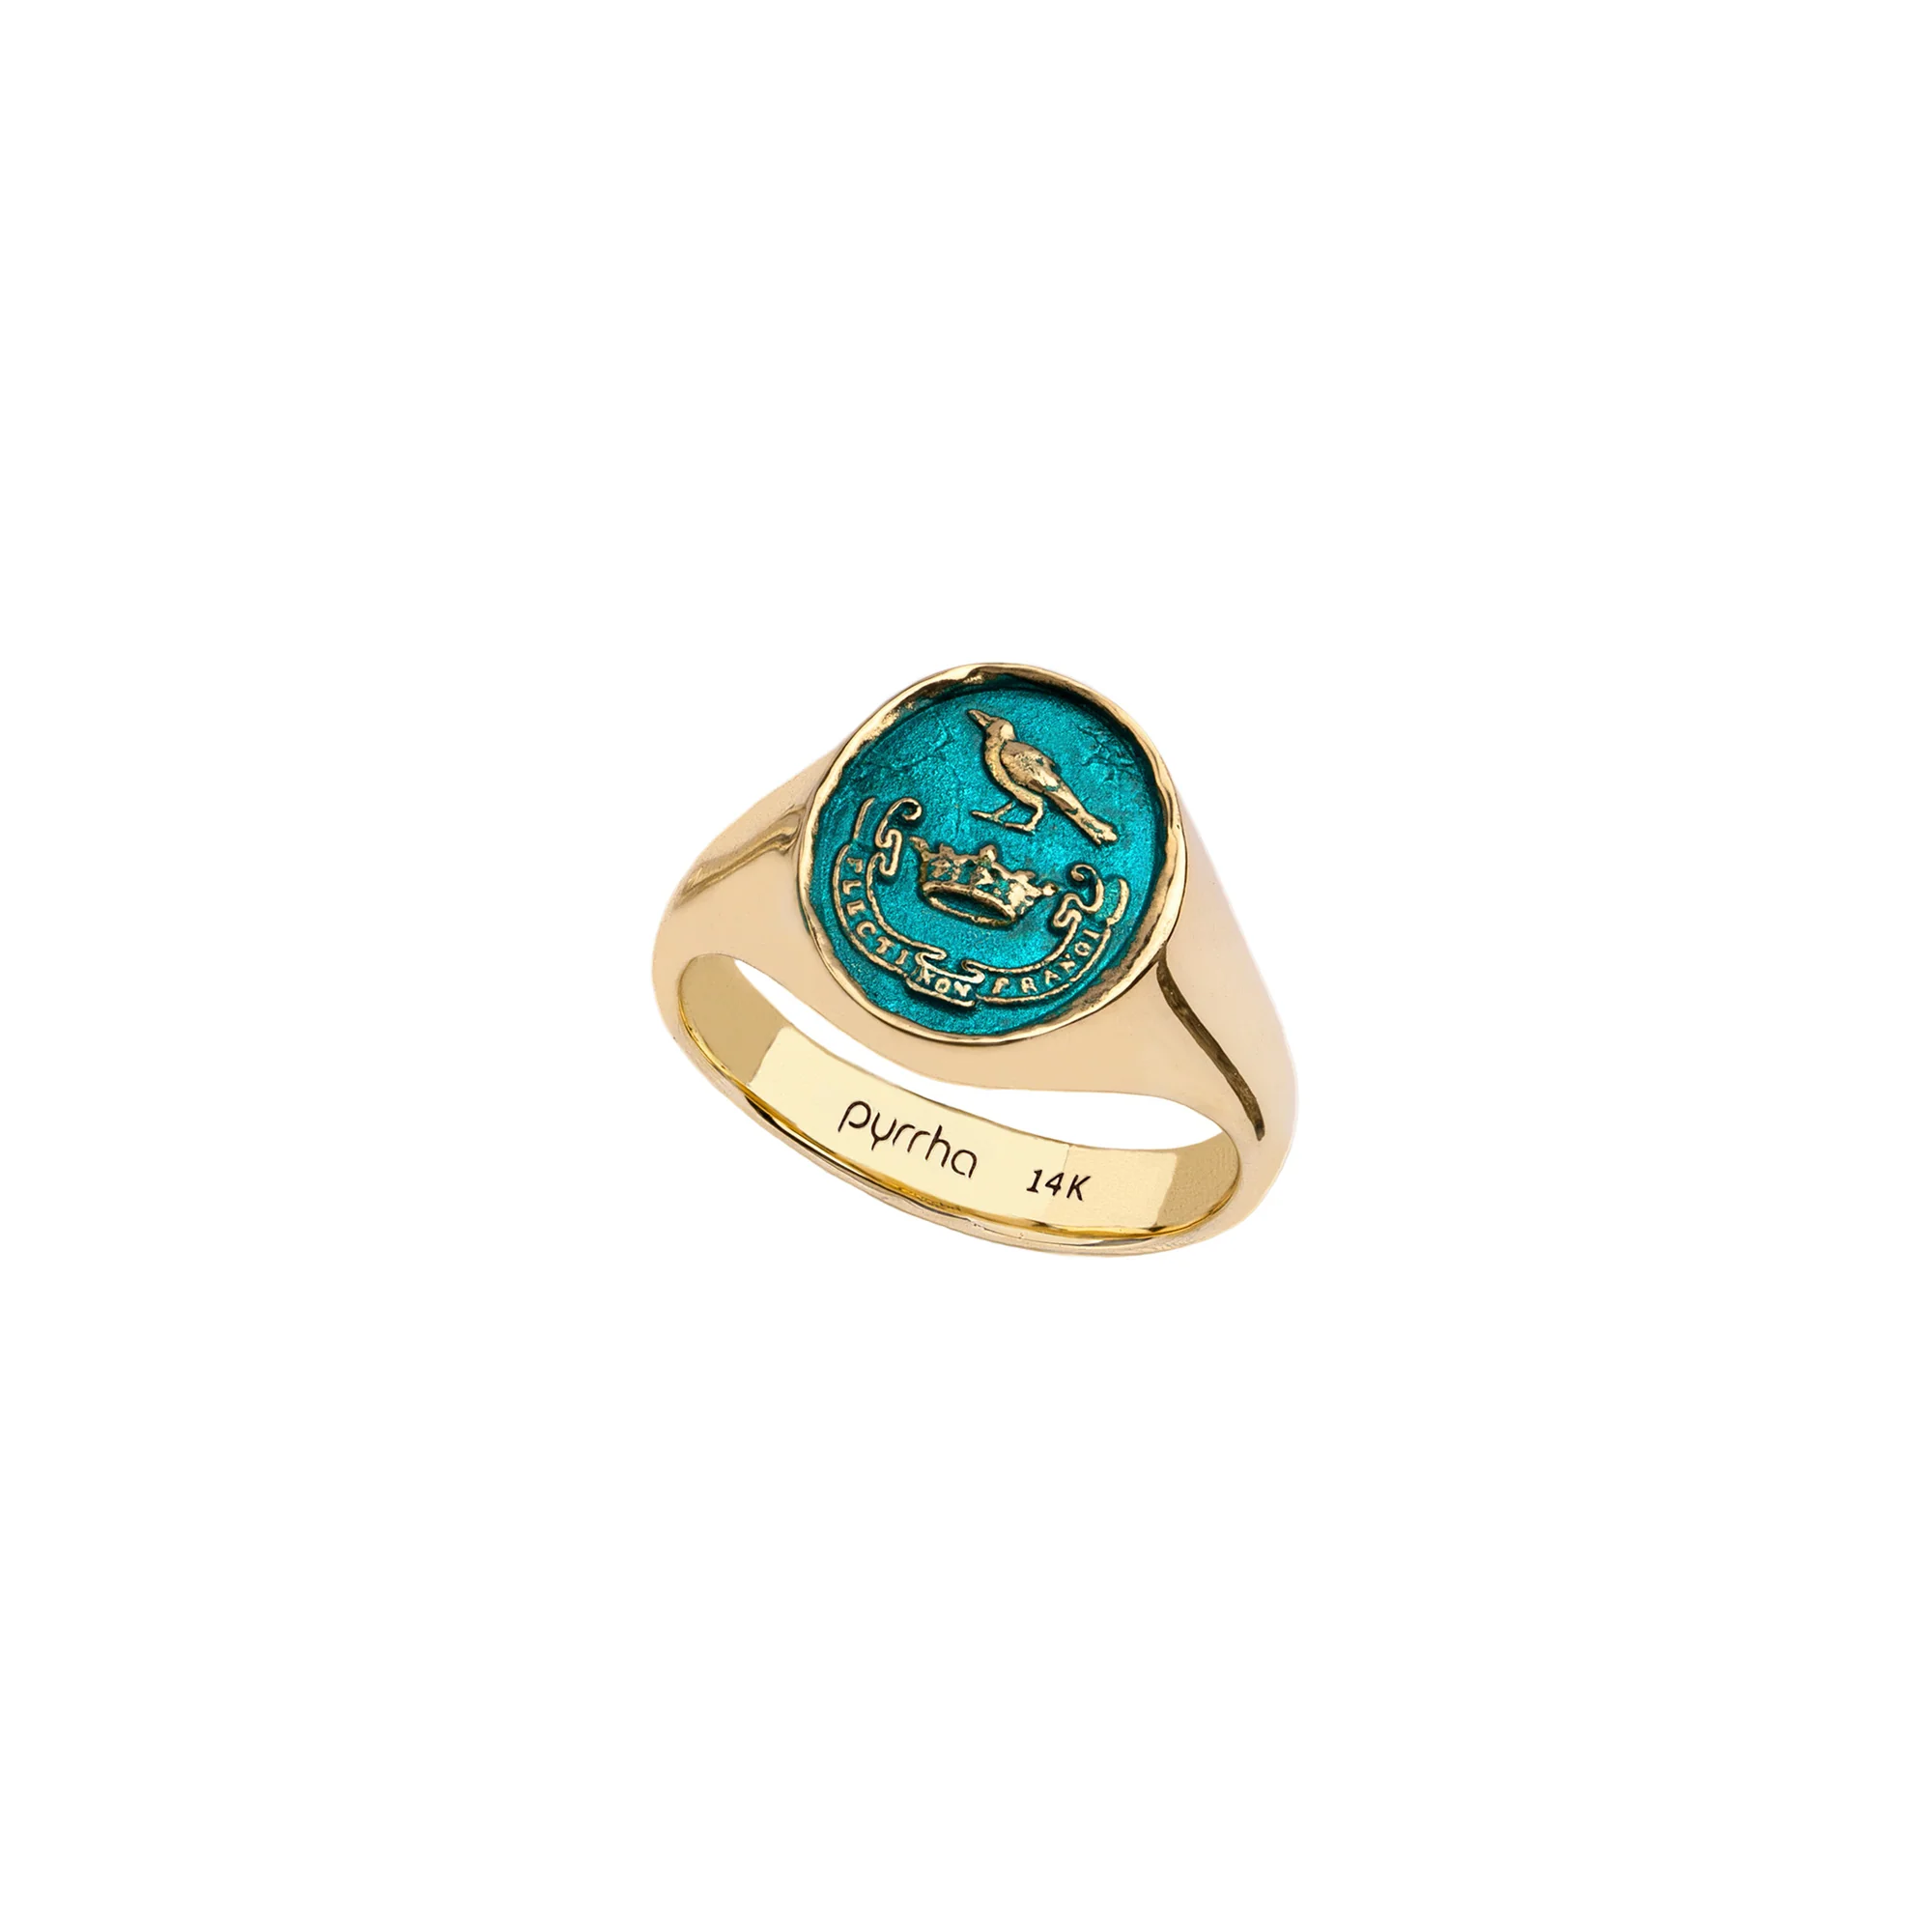 Unbreakable 14K Gold Signet Ring - True Colors | Magpie Jewellery